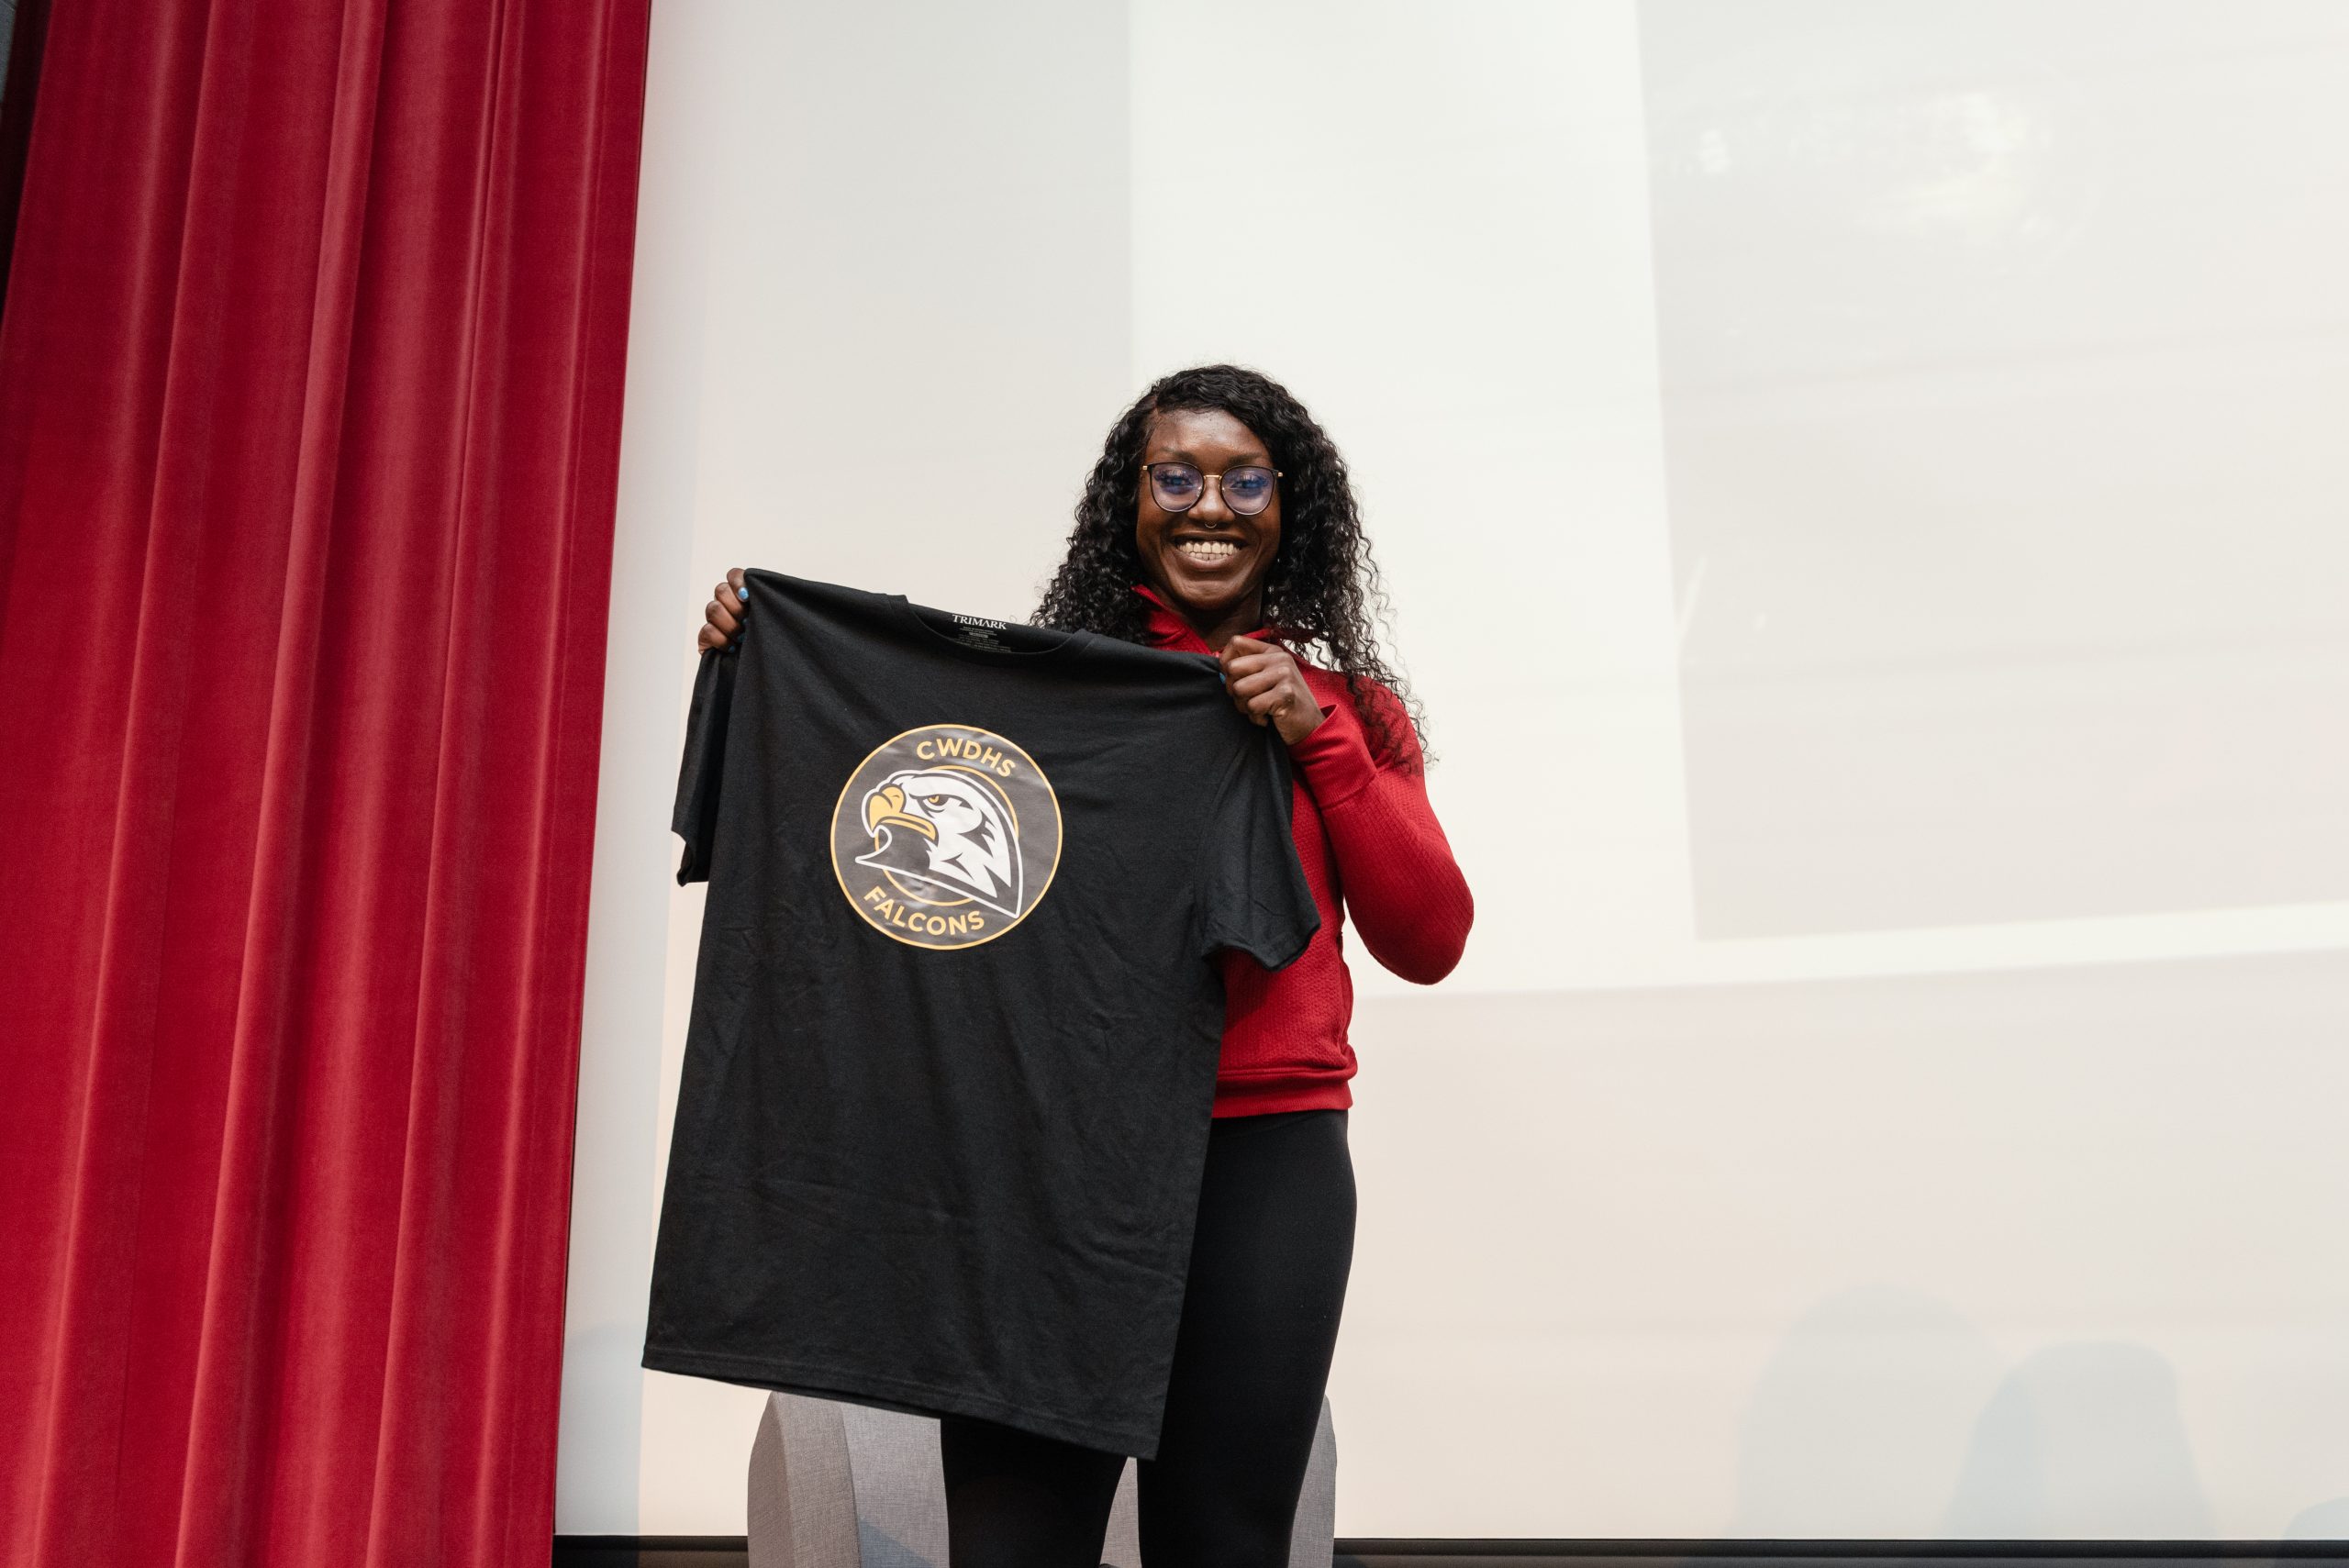 This photo features Olympian, Cynthia Appiah holding up a Centre Wellington District High  School t-shirt to her body.